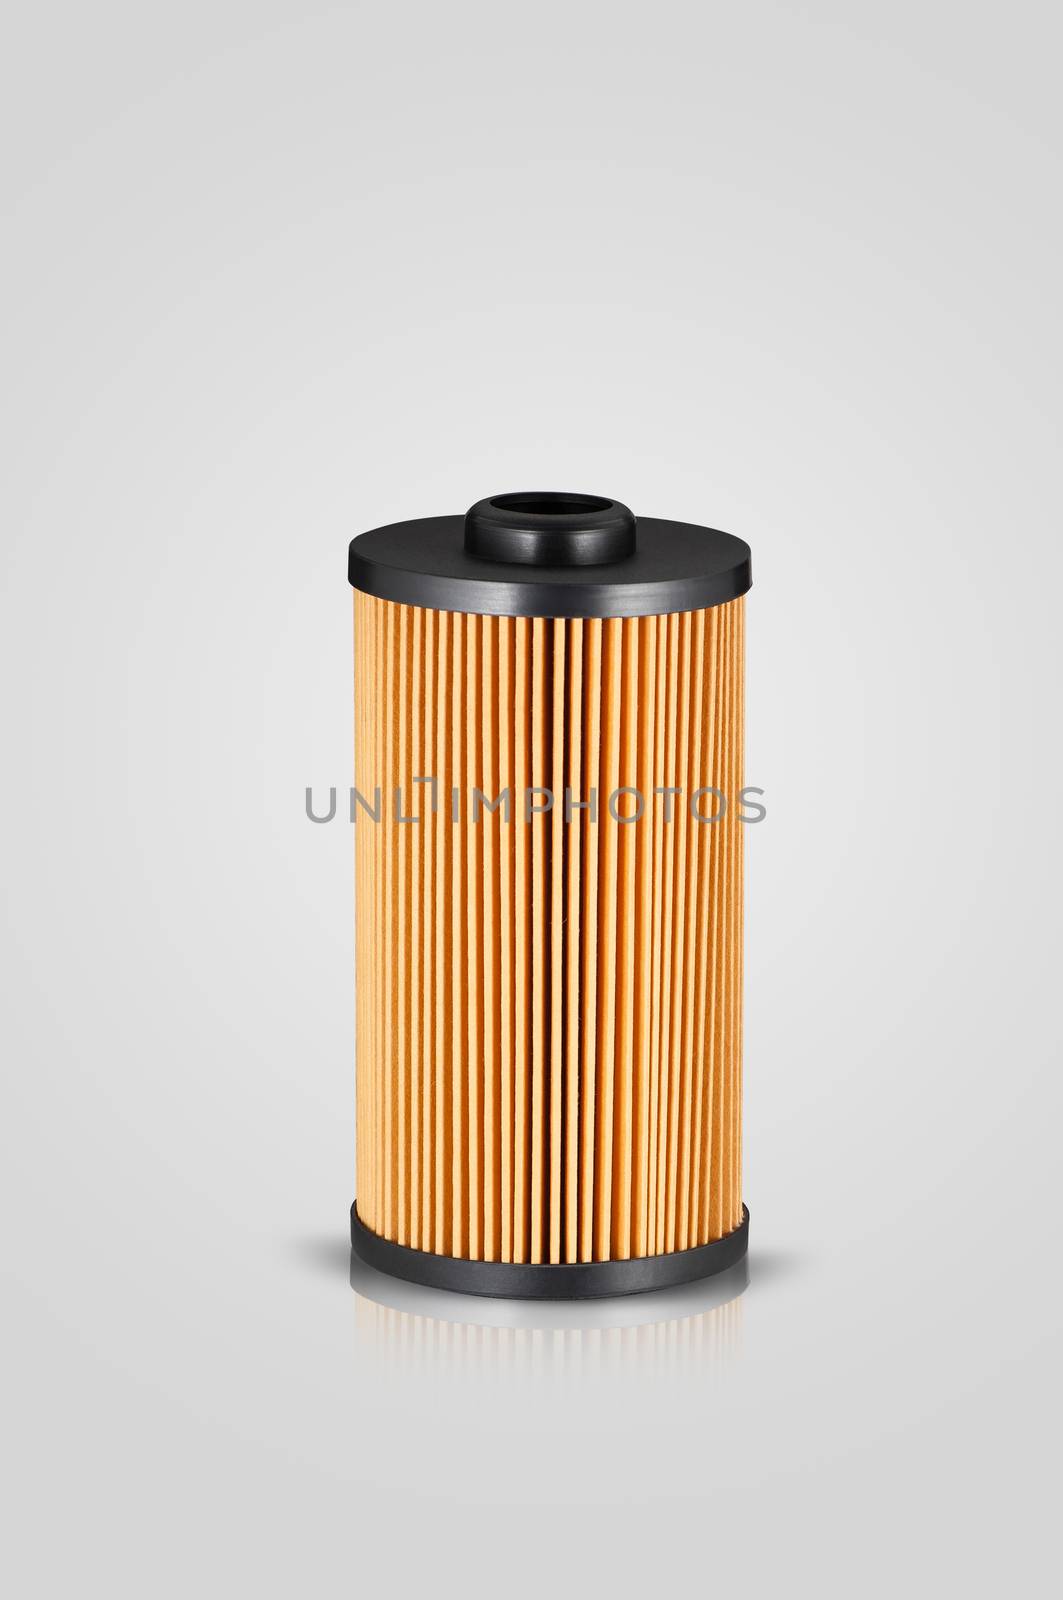 automobile filter on a white background by A_Karim